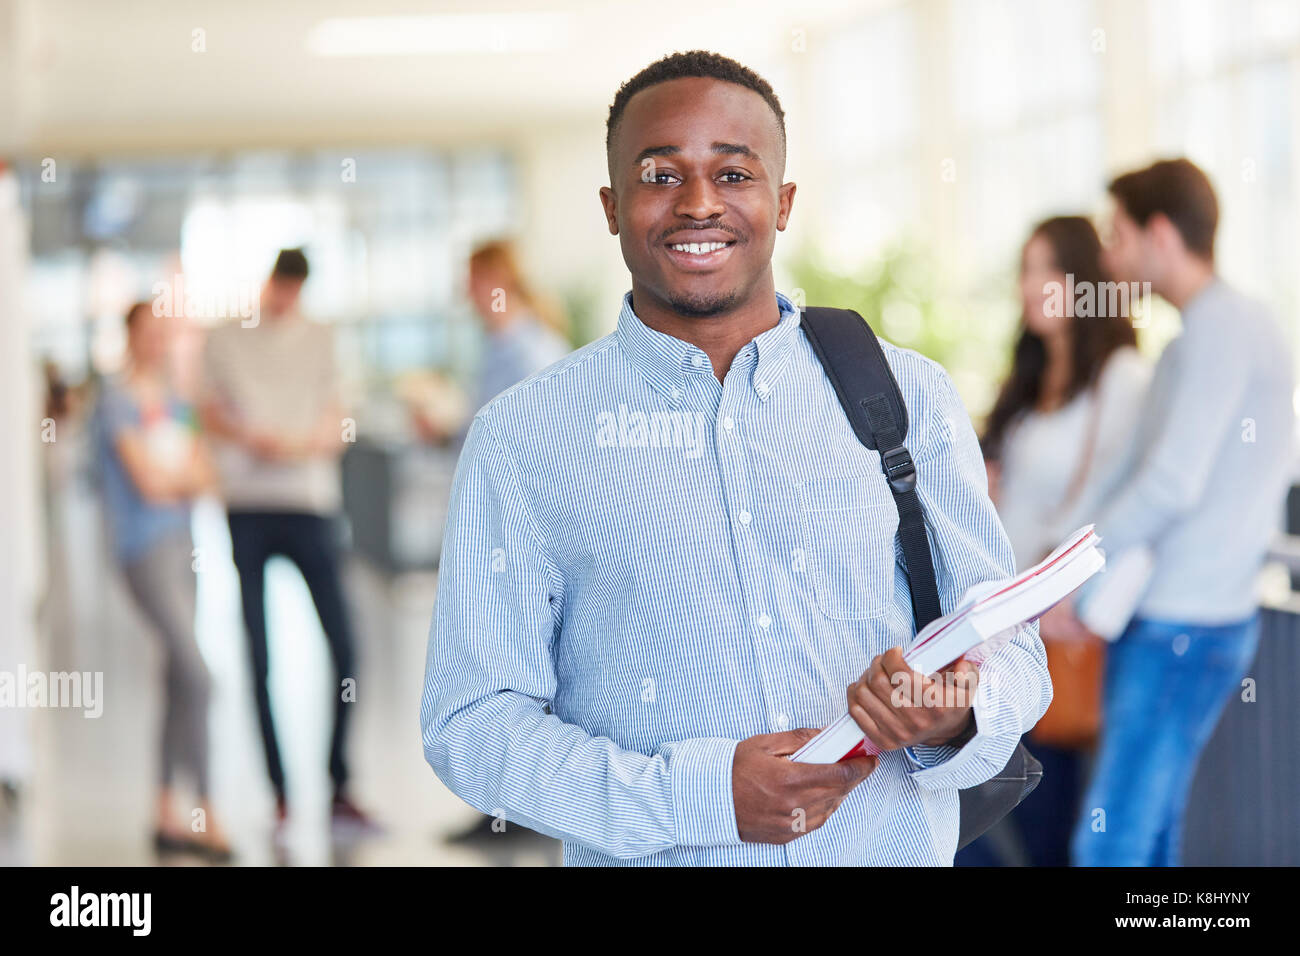 Young african studentin college or university studies Stock Photo